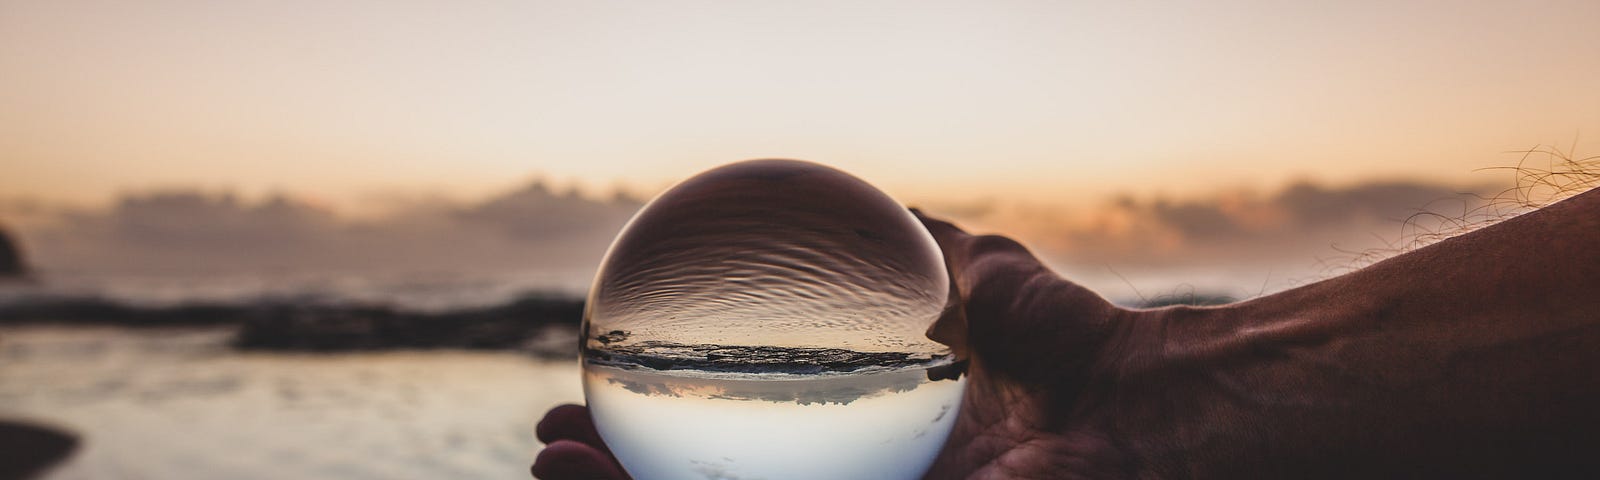 Photo by Photoholgic; photo of man holding crystal ball posted on James Goydos MD’s article re prediction of COVID-19 outcomes